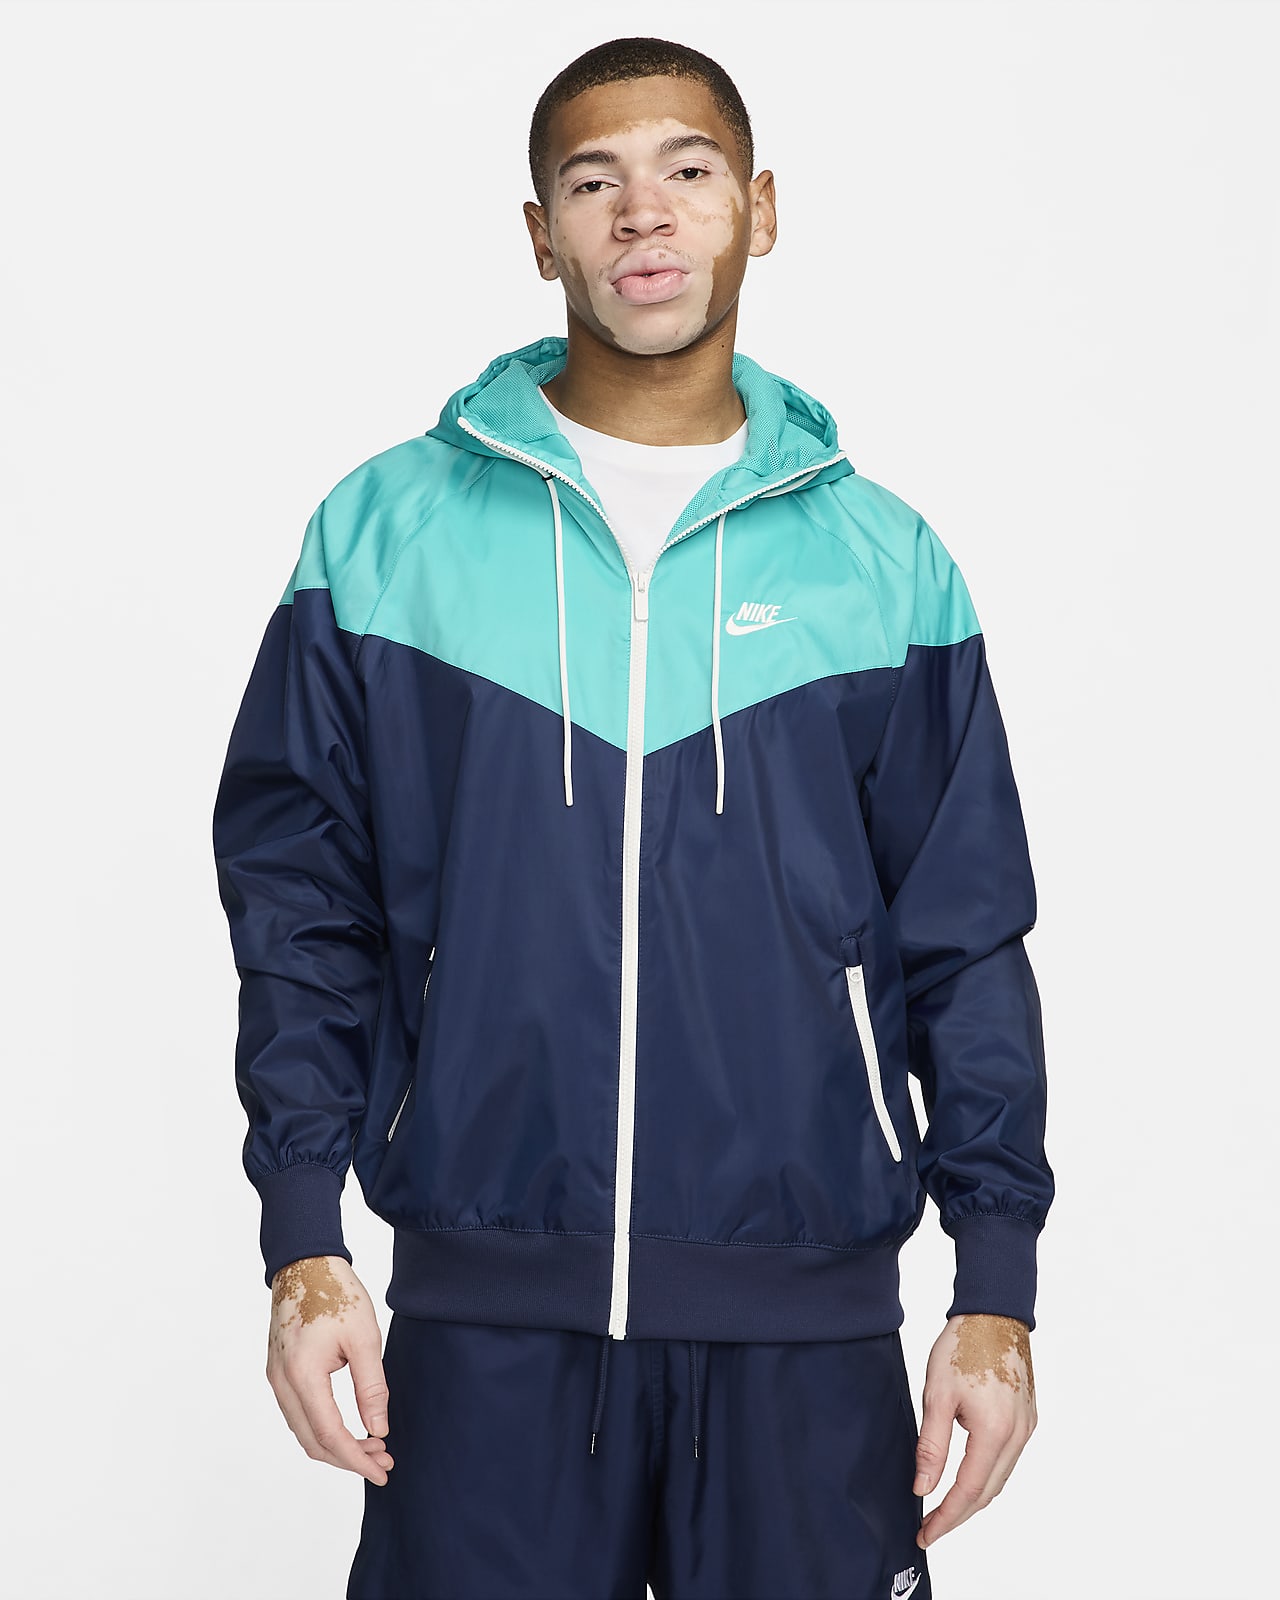 https://static.nike.com/a/images/t_PDP_1280_v1/f_auto,q_auto:eco/6d8d2795-cd42-4f91-b3c8-c66d23b79de5/sportswear-windrunner-hooded-jacket-sP5XX2.png